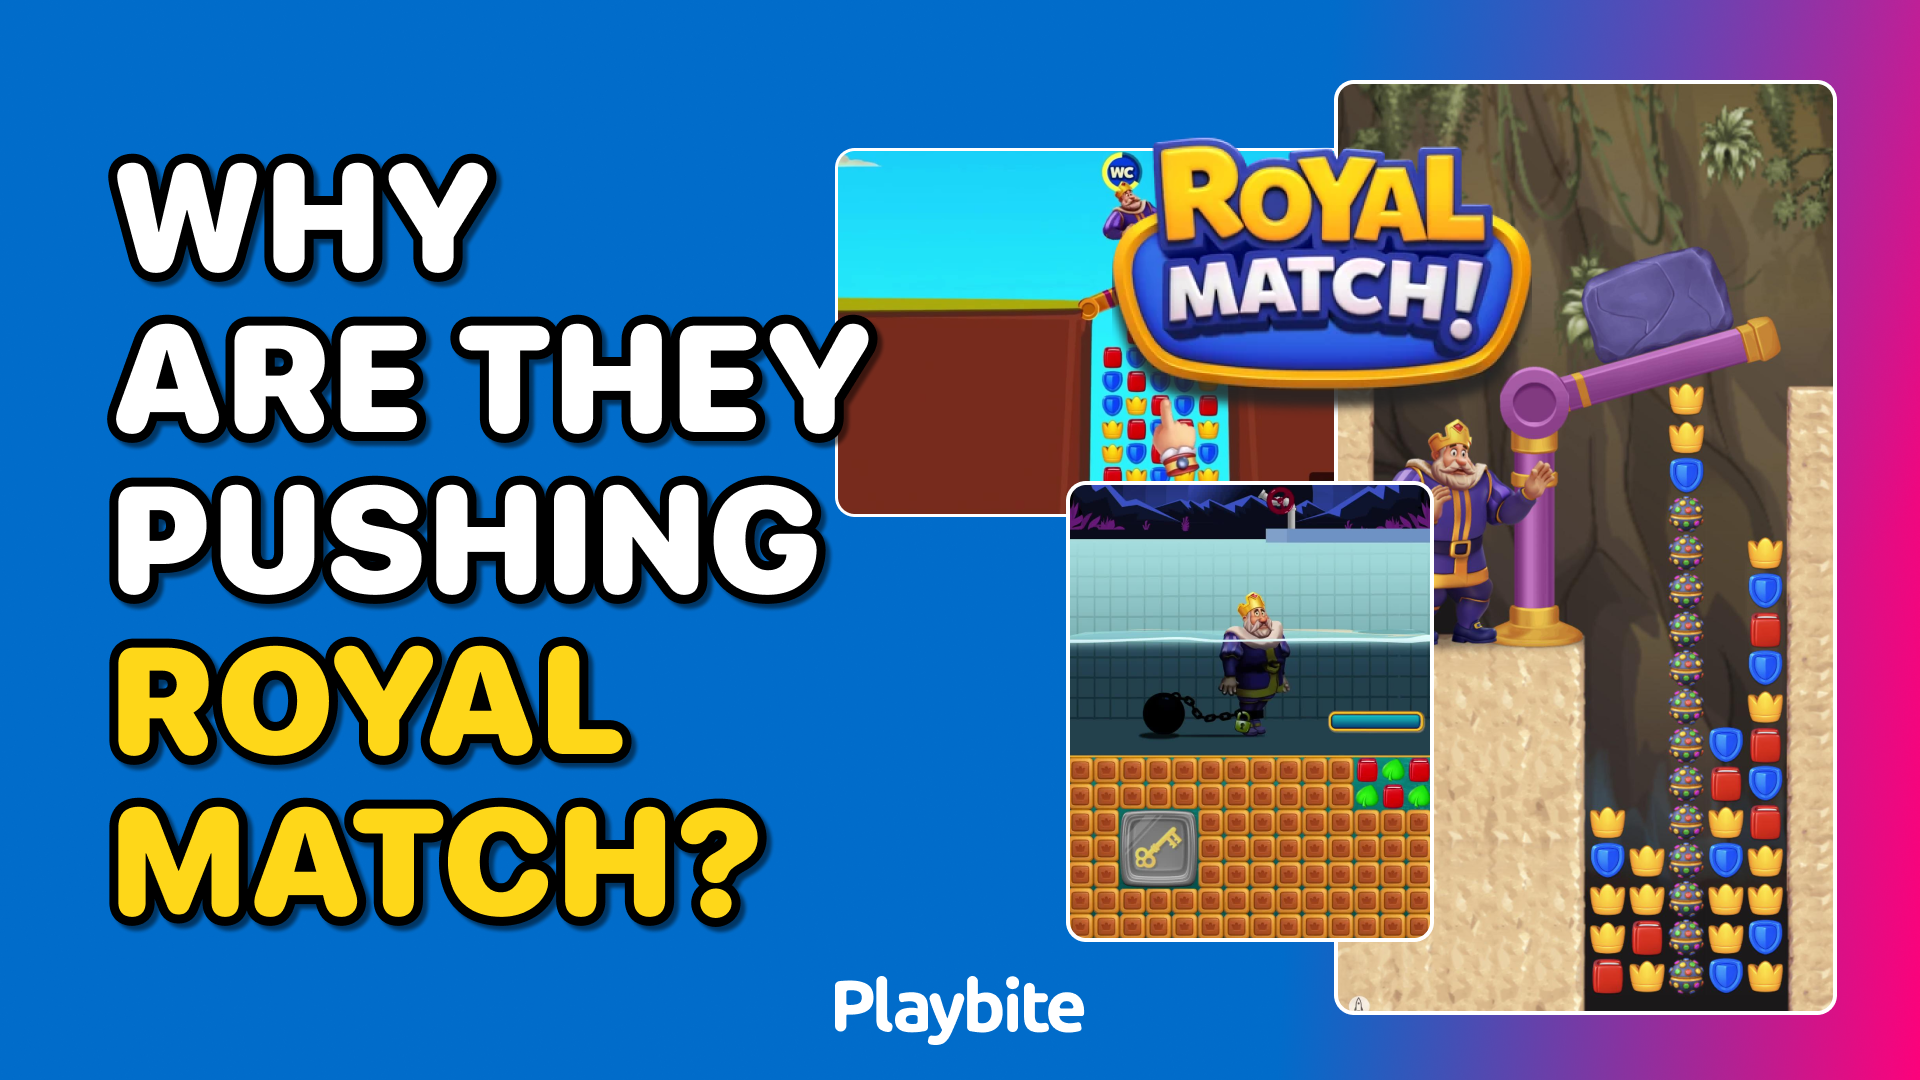 Why Are They Pushing Royal Match?